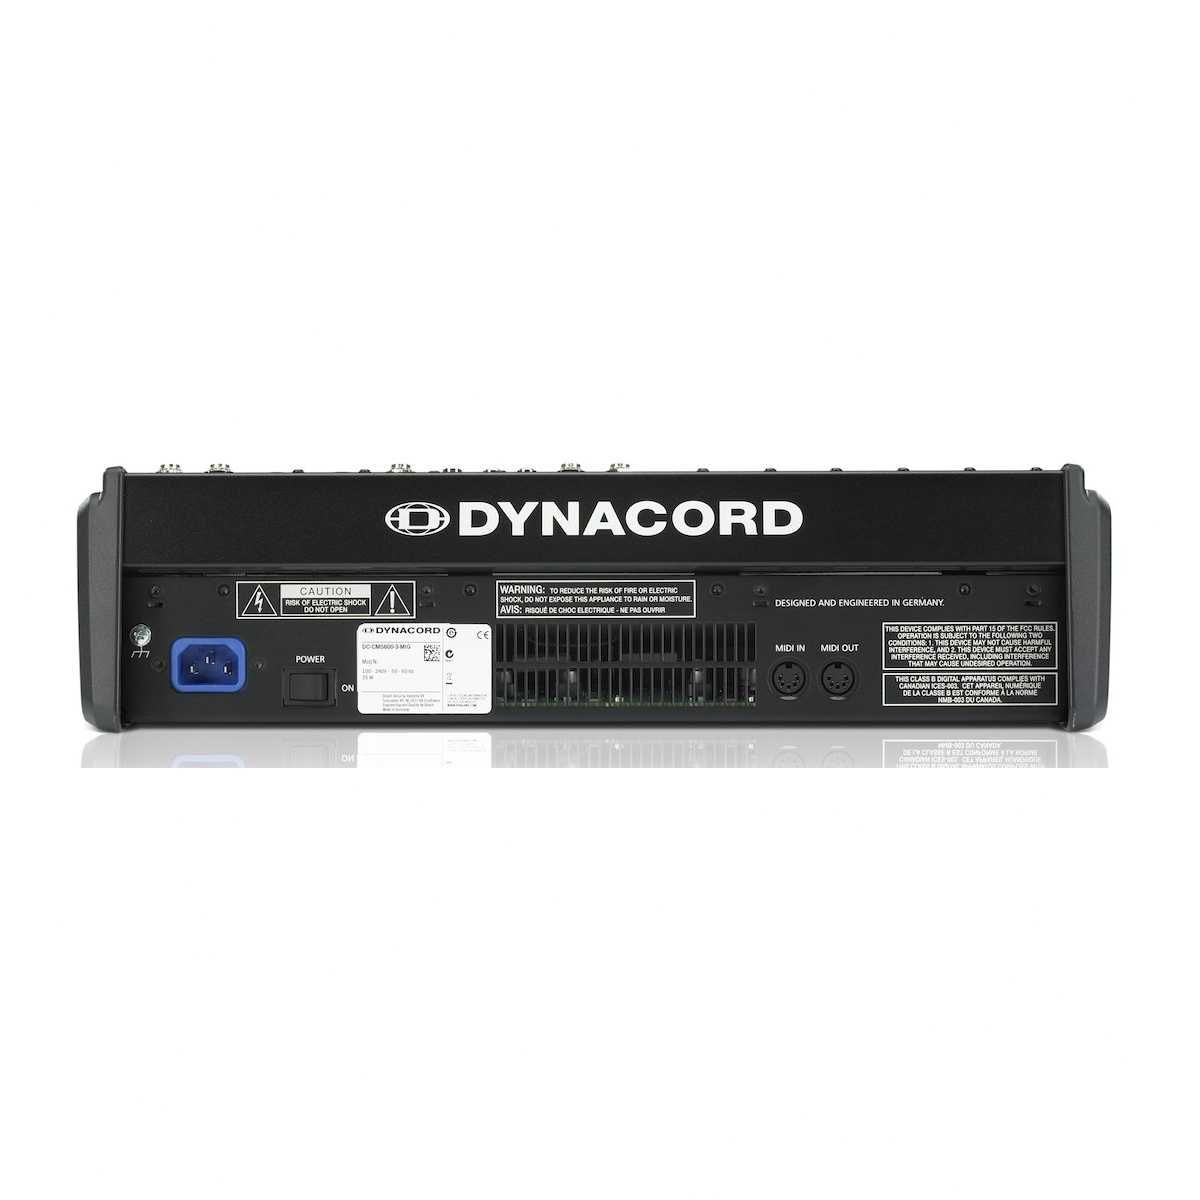 DYNACORD CMS600-3 mikser Nowy Sklep Made in Germany